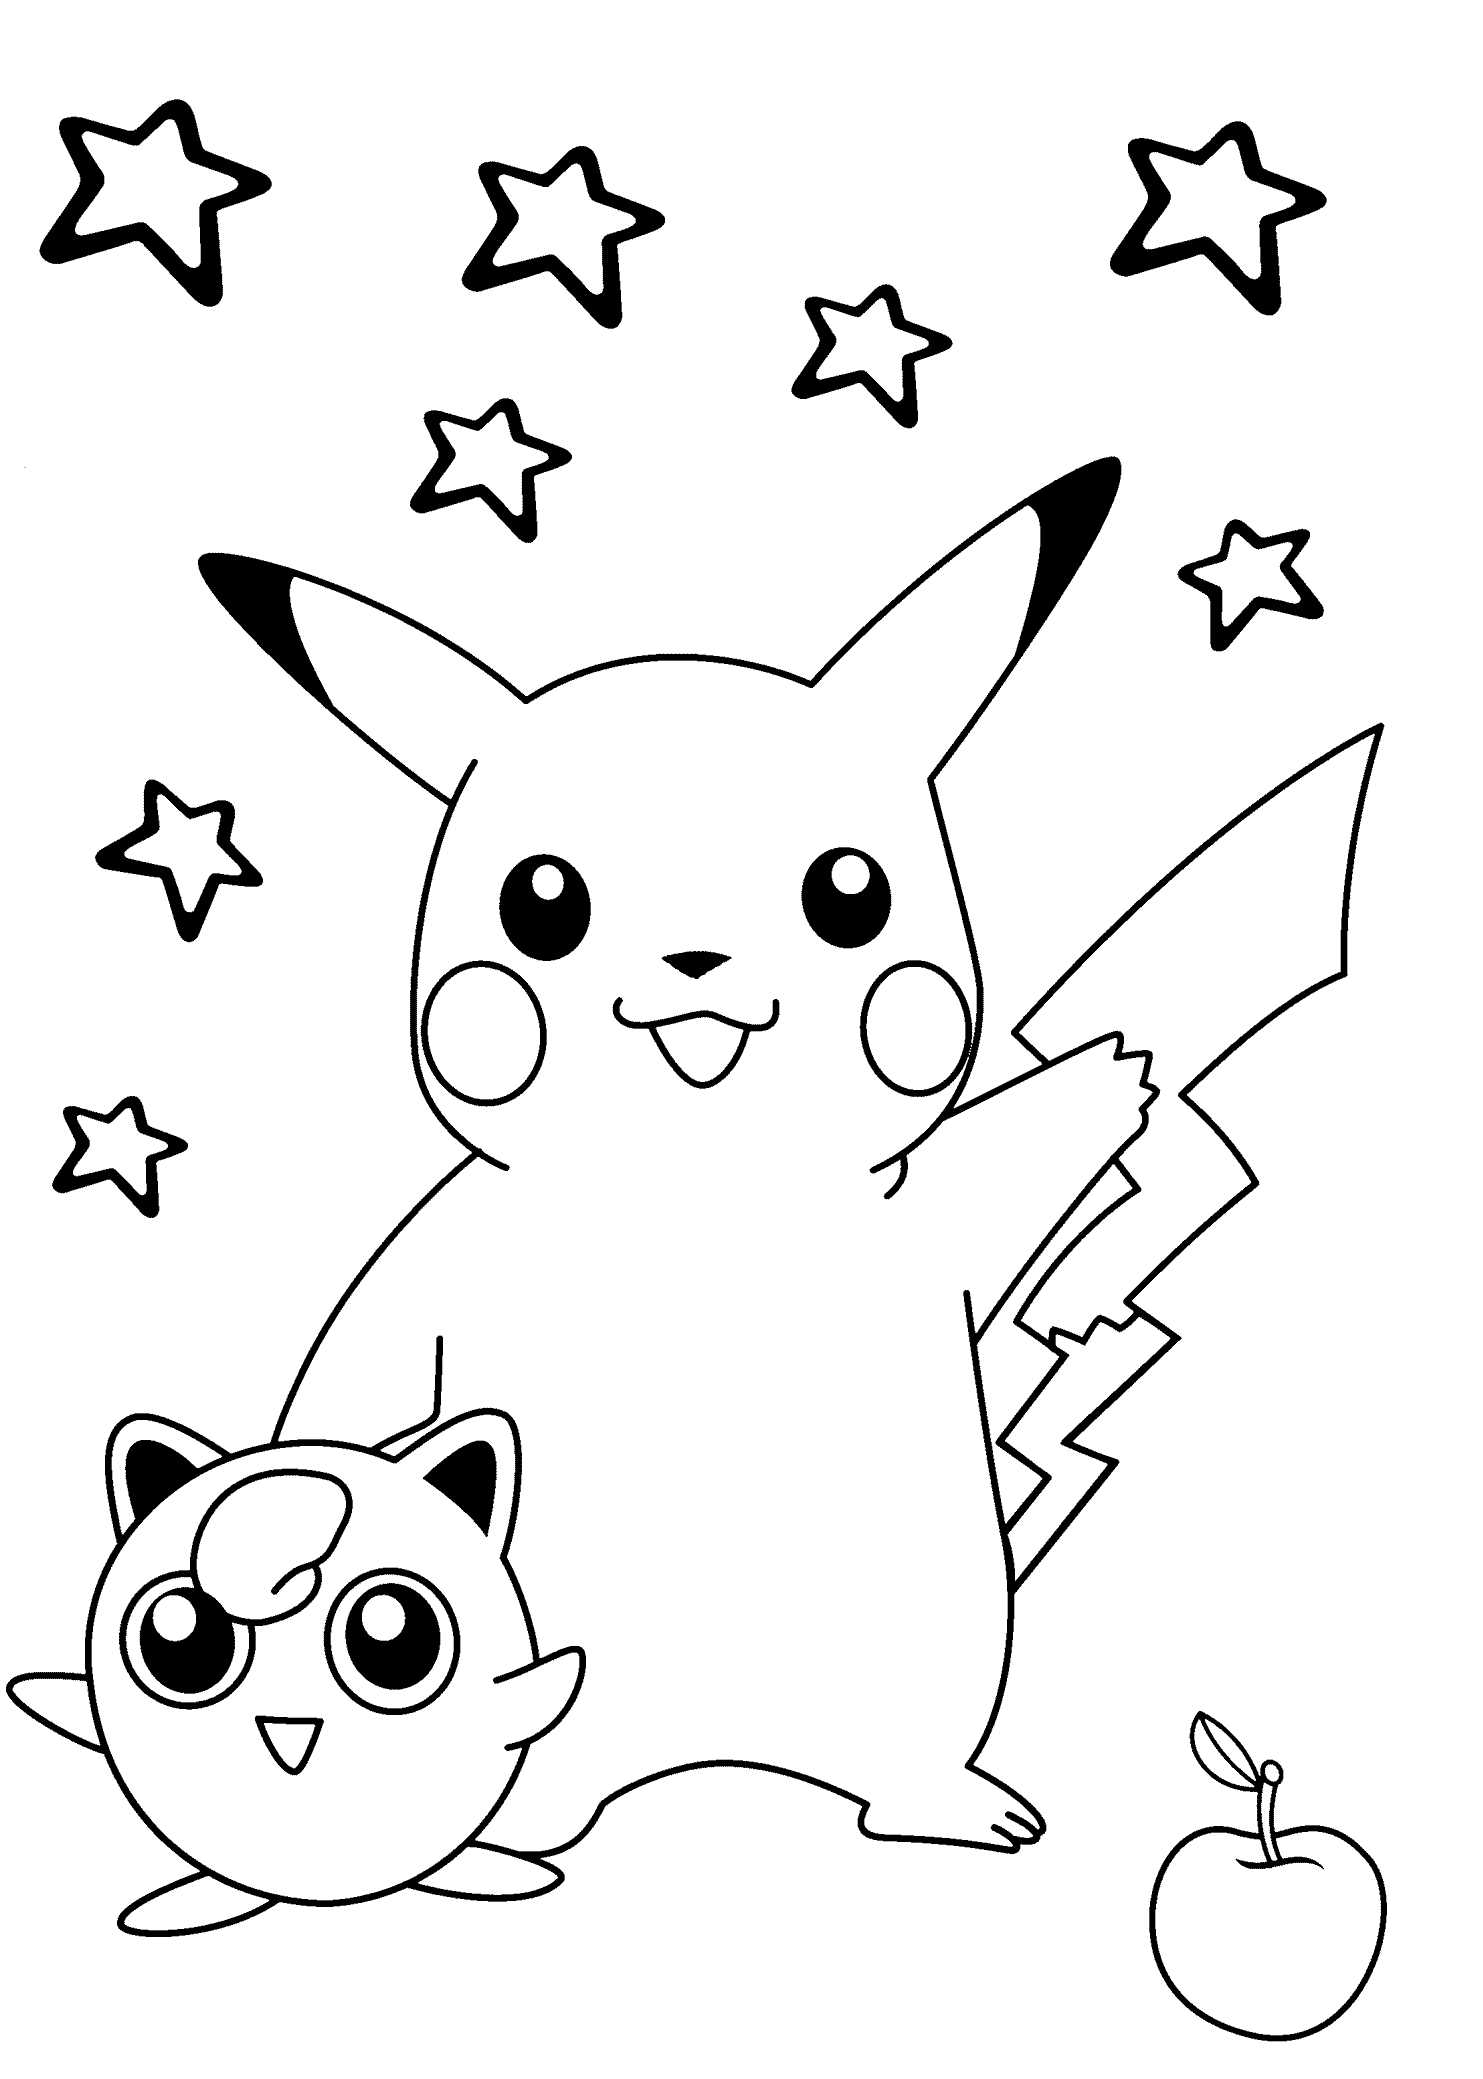 Anger Worksheets for Kids together with Smiling Pokemon Coloring Pages for Kids Printable Free